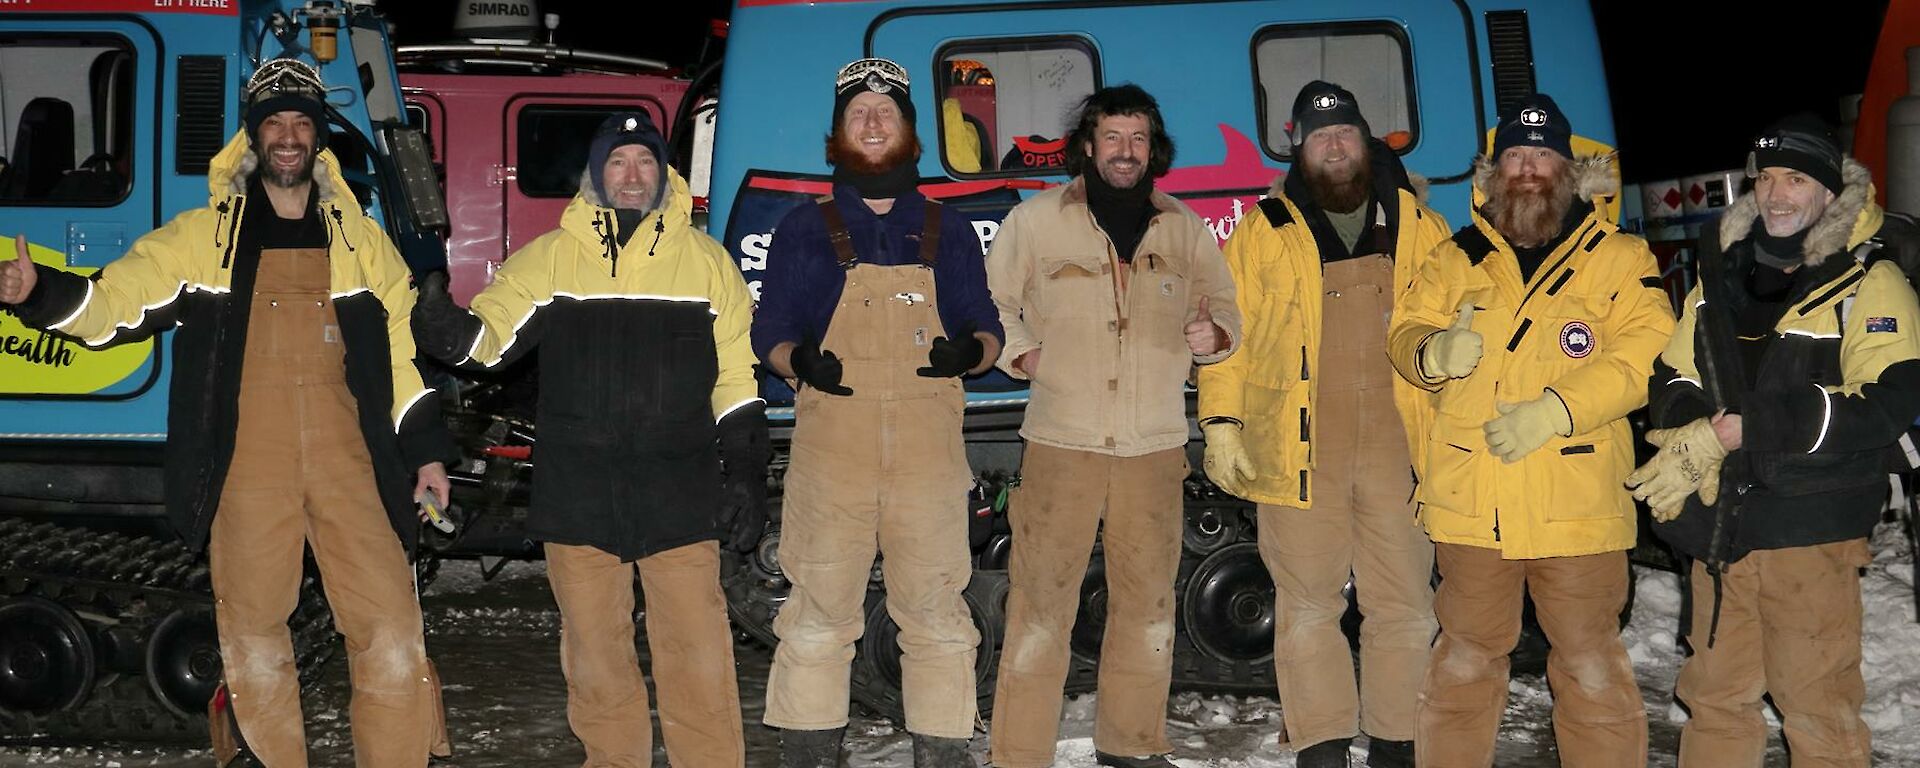 The crew standing along the side of the blue Hagglund vehicle, with big smiles and thumbs up, about to depart in the dark of early morning